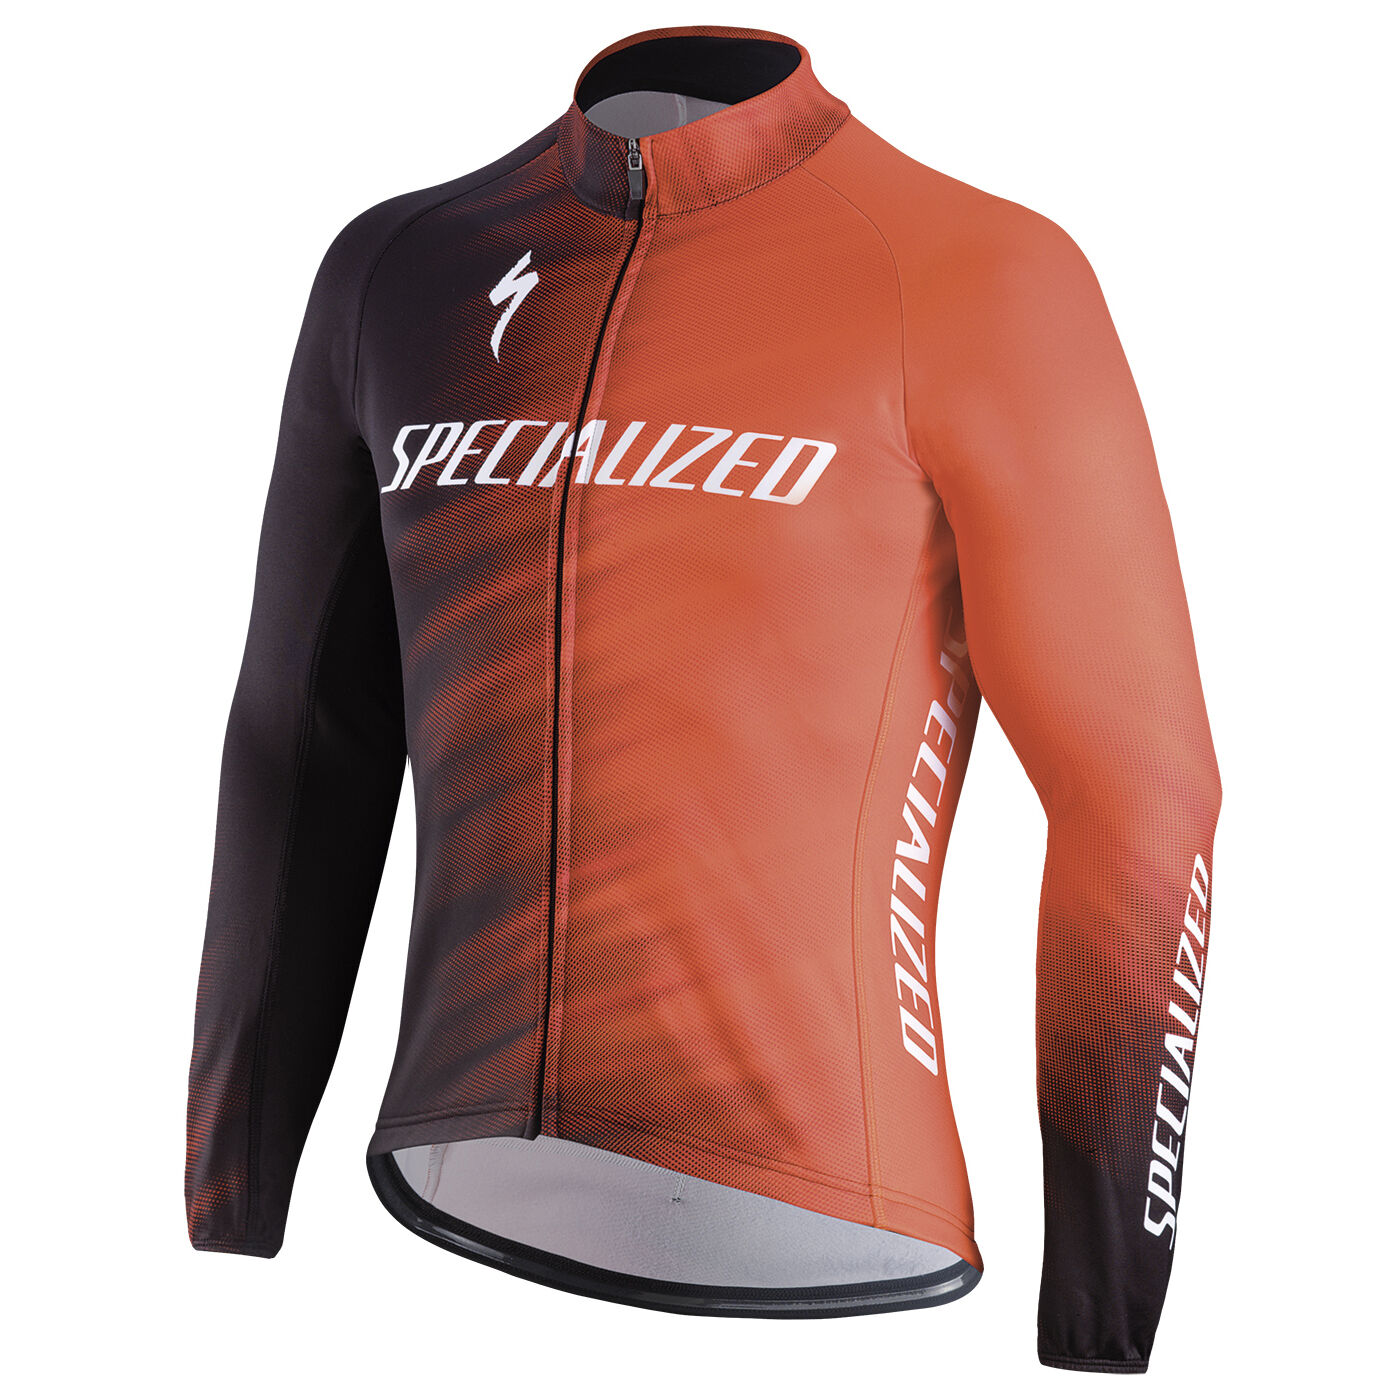 Specialized Therminal SL Team Expert LordGun online bike store